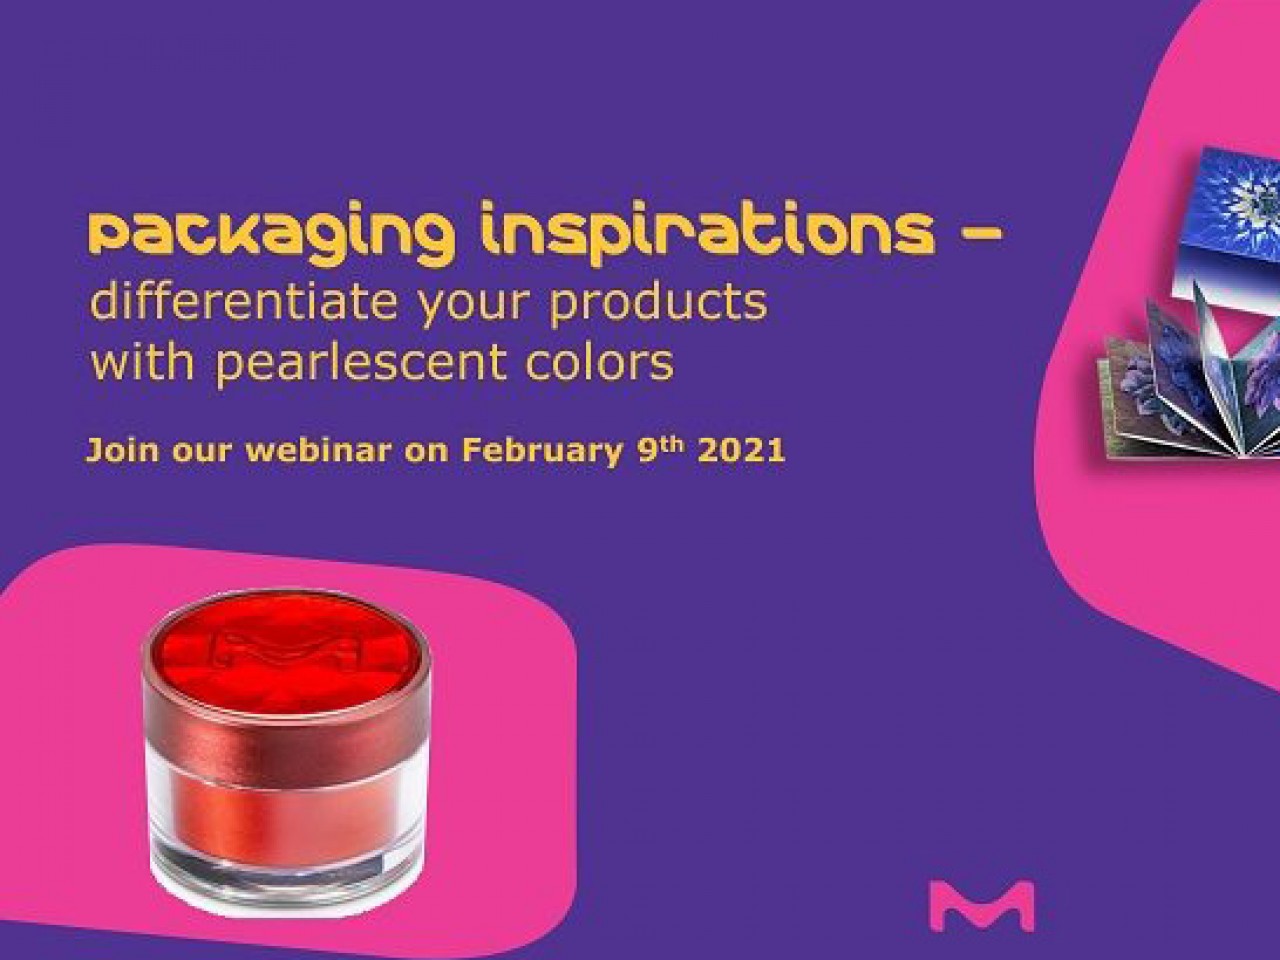 This FREE webinar "Packaging inspirations" is organized by our partner Merck